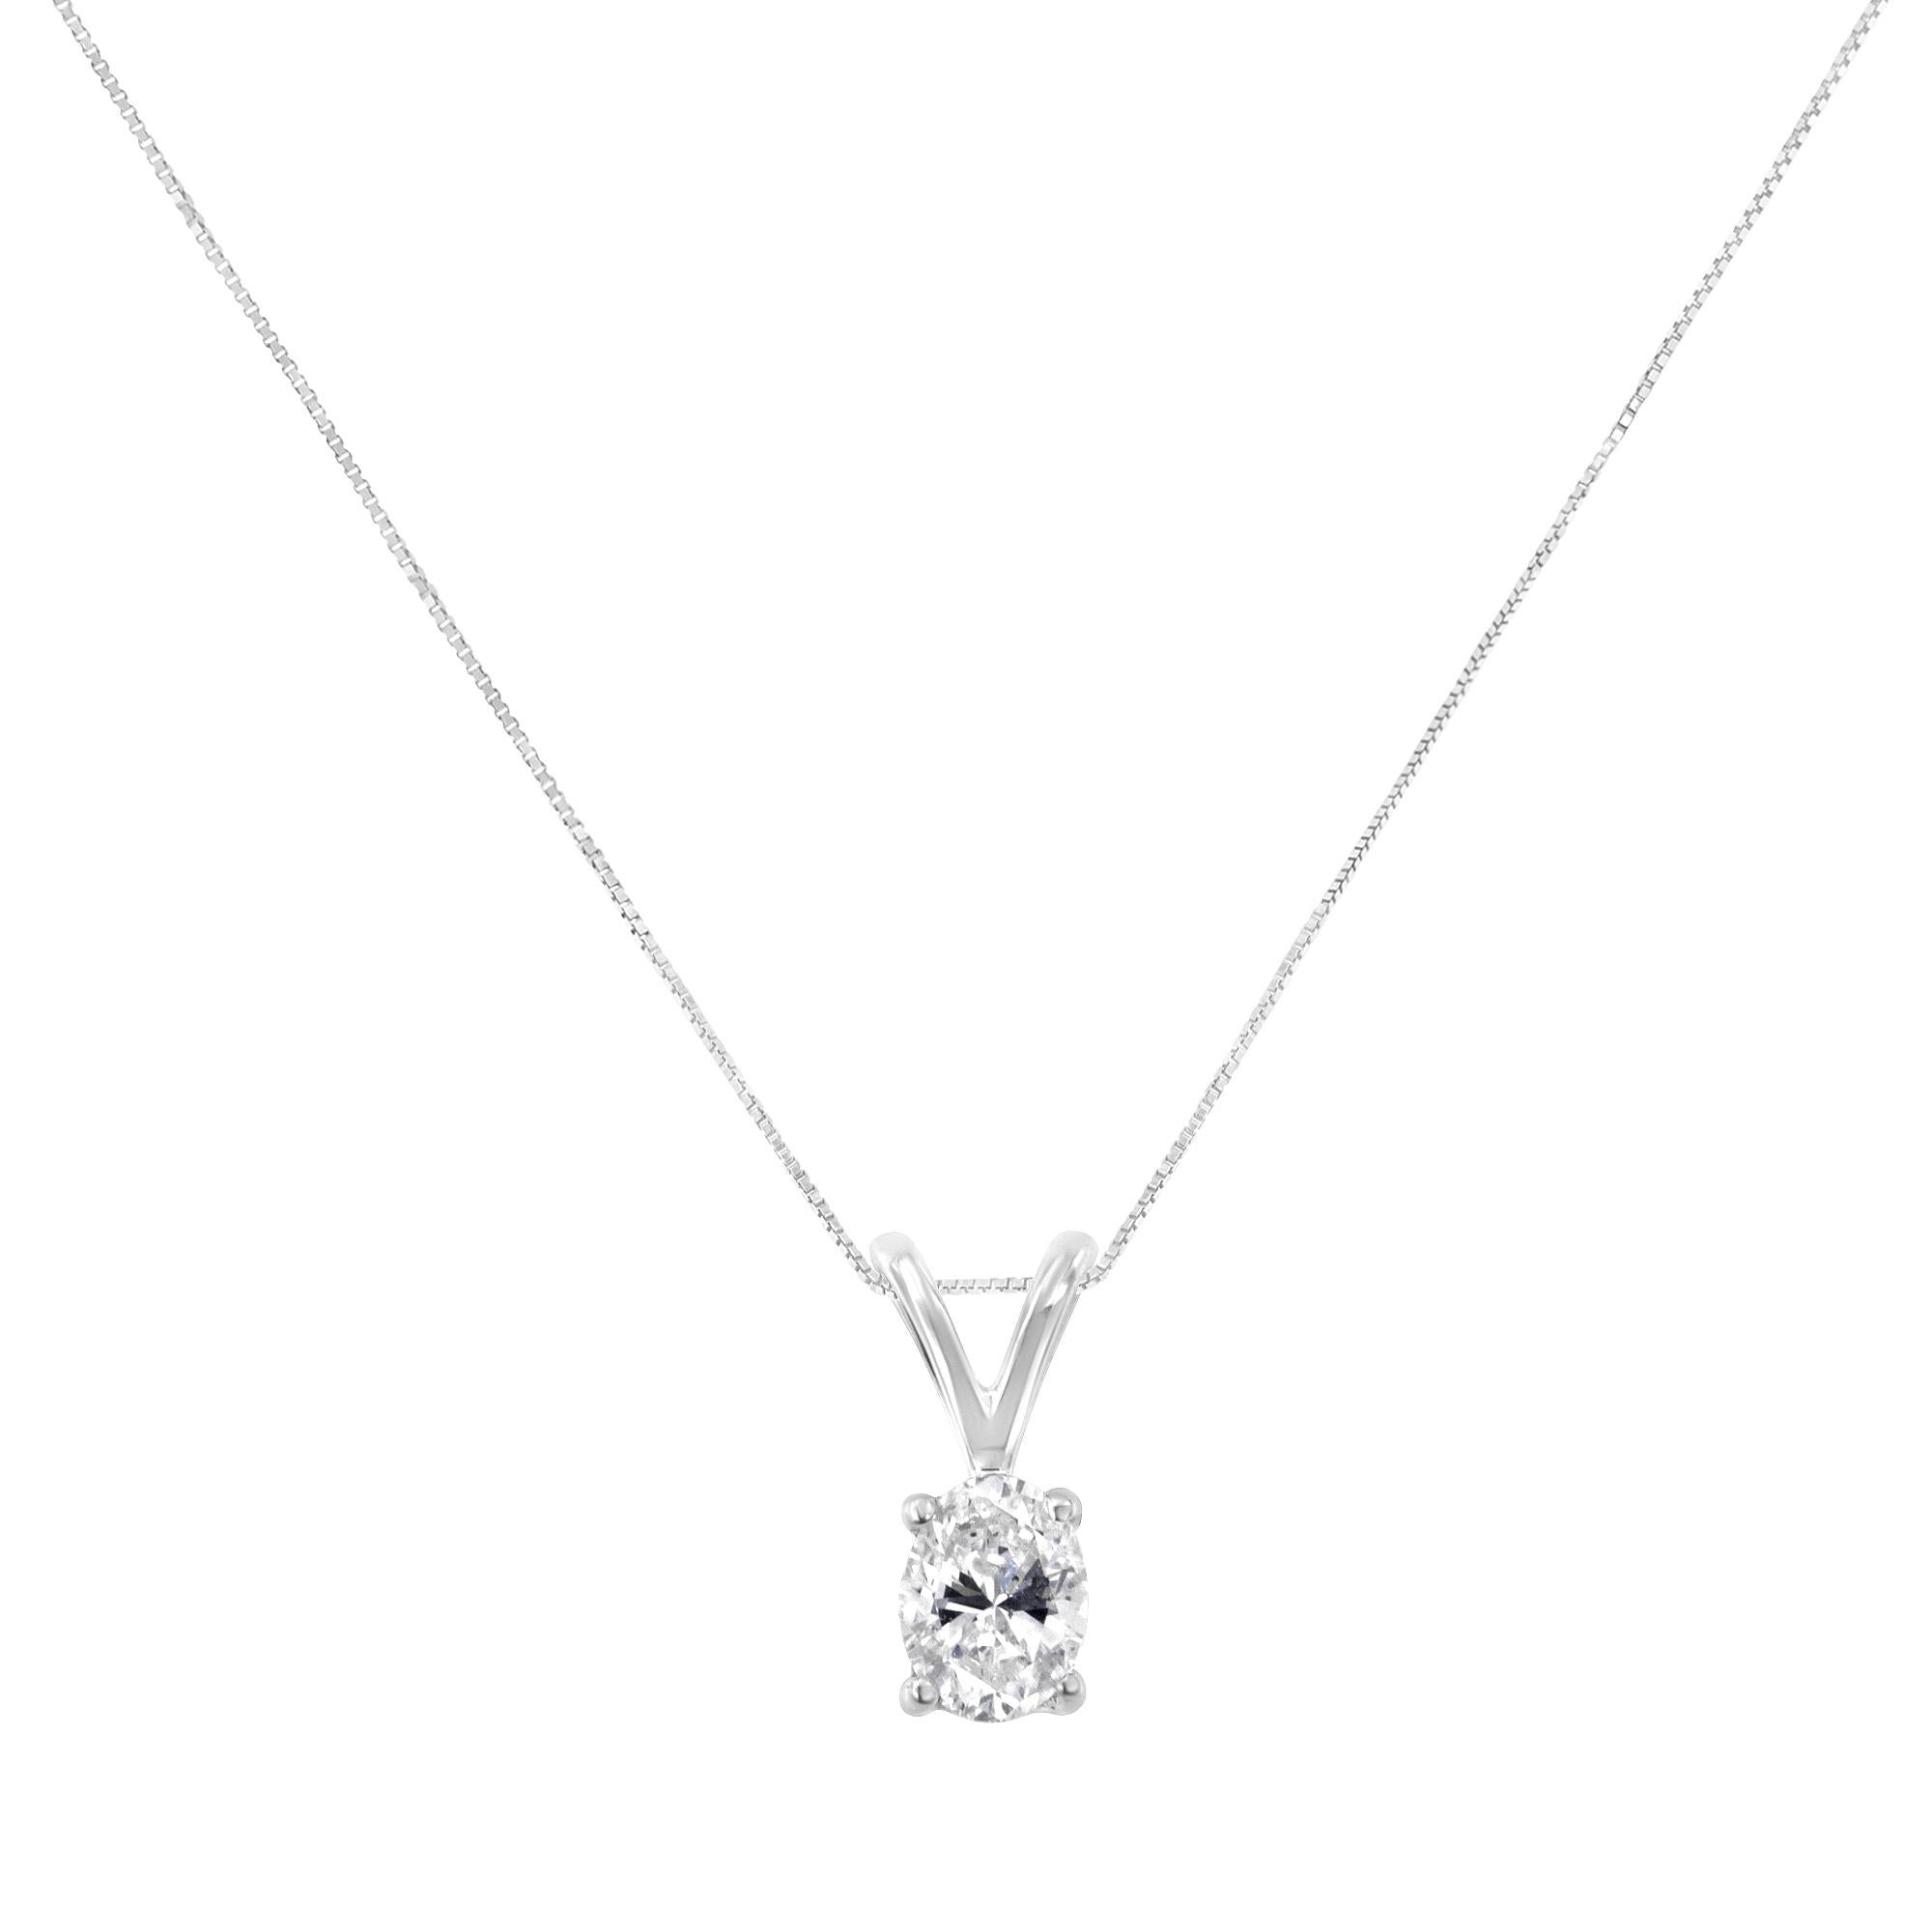 A brilliant 1/5ct oval cut diamond is highlighted in this classic four prong pendant. The pendant delicately hangs from a rolo chain. This 10k white gold necklace is perfect for any occasion. This beautiful necklace includes 18” rolo chain with